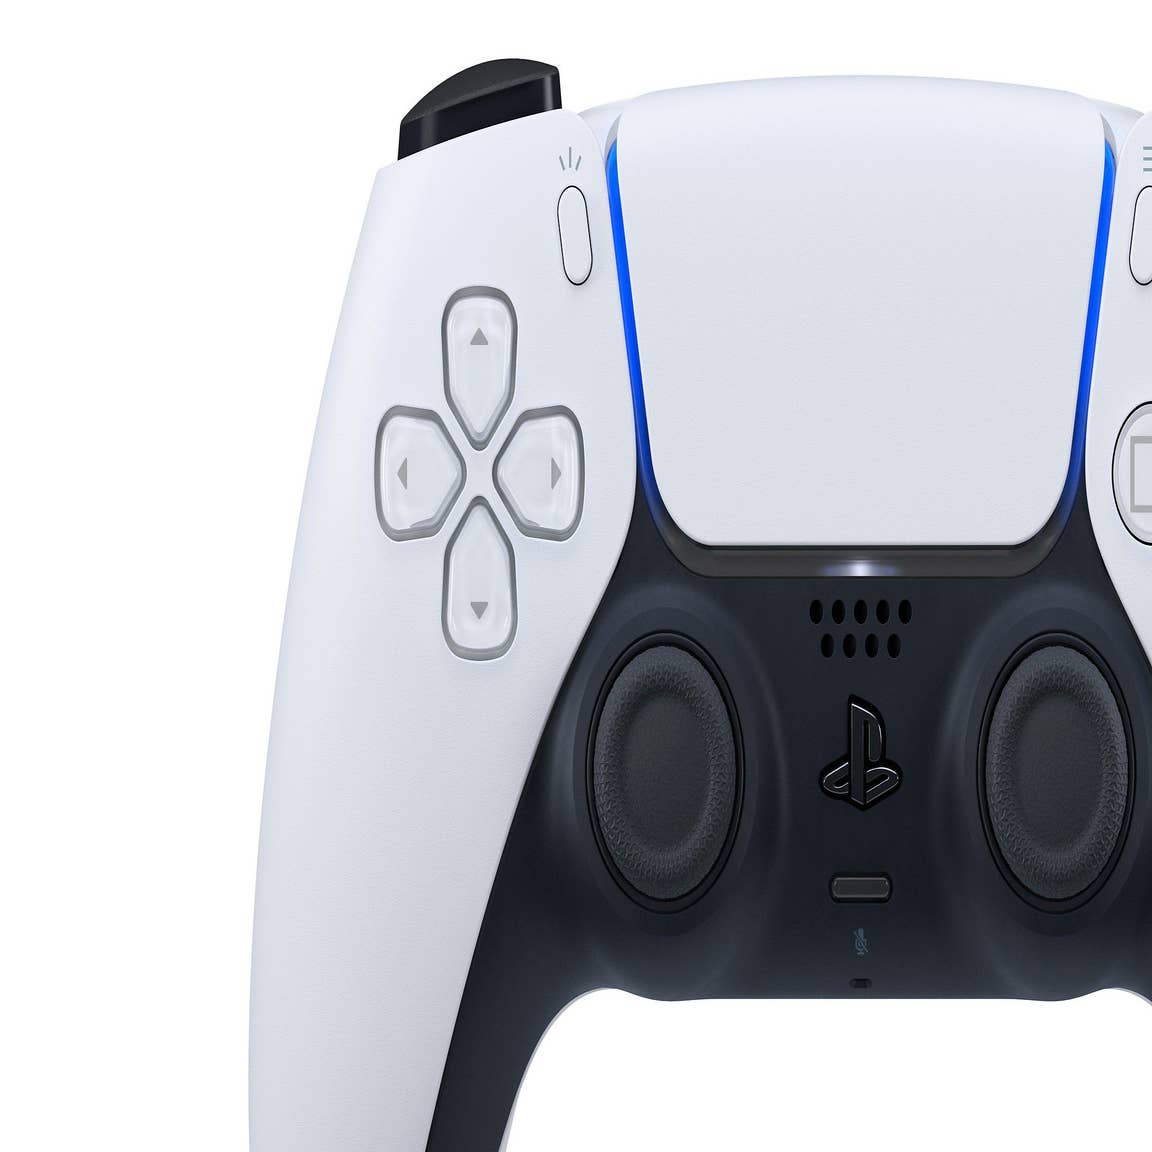 Sony's DualSense controller can now be updated on a PC, no PS5 needed